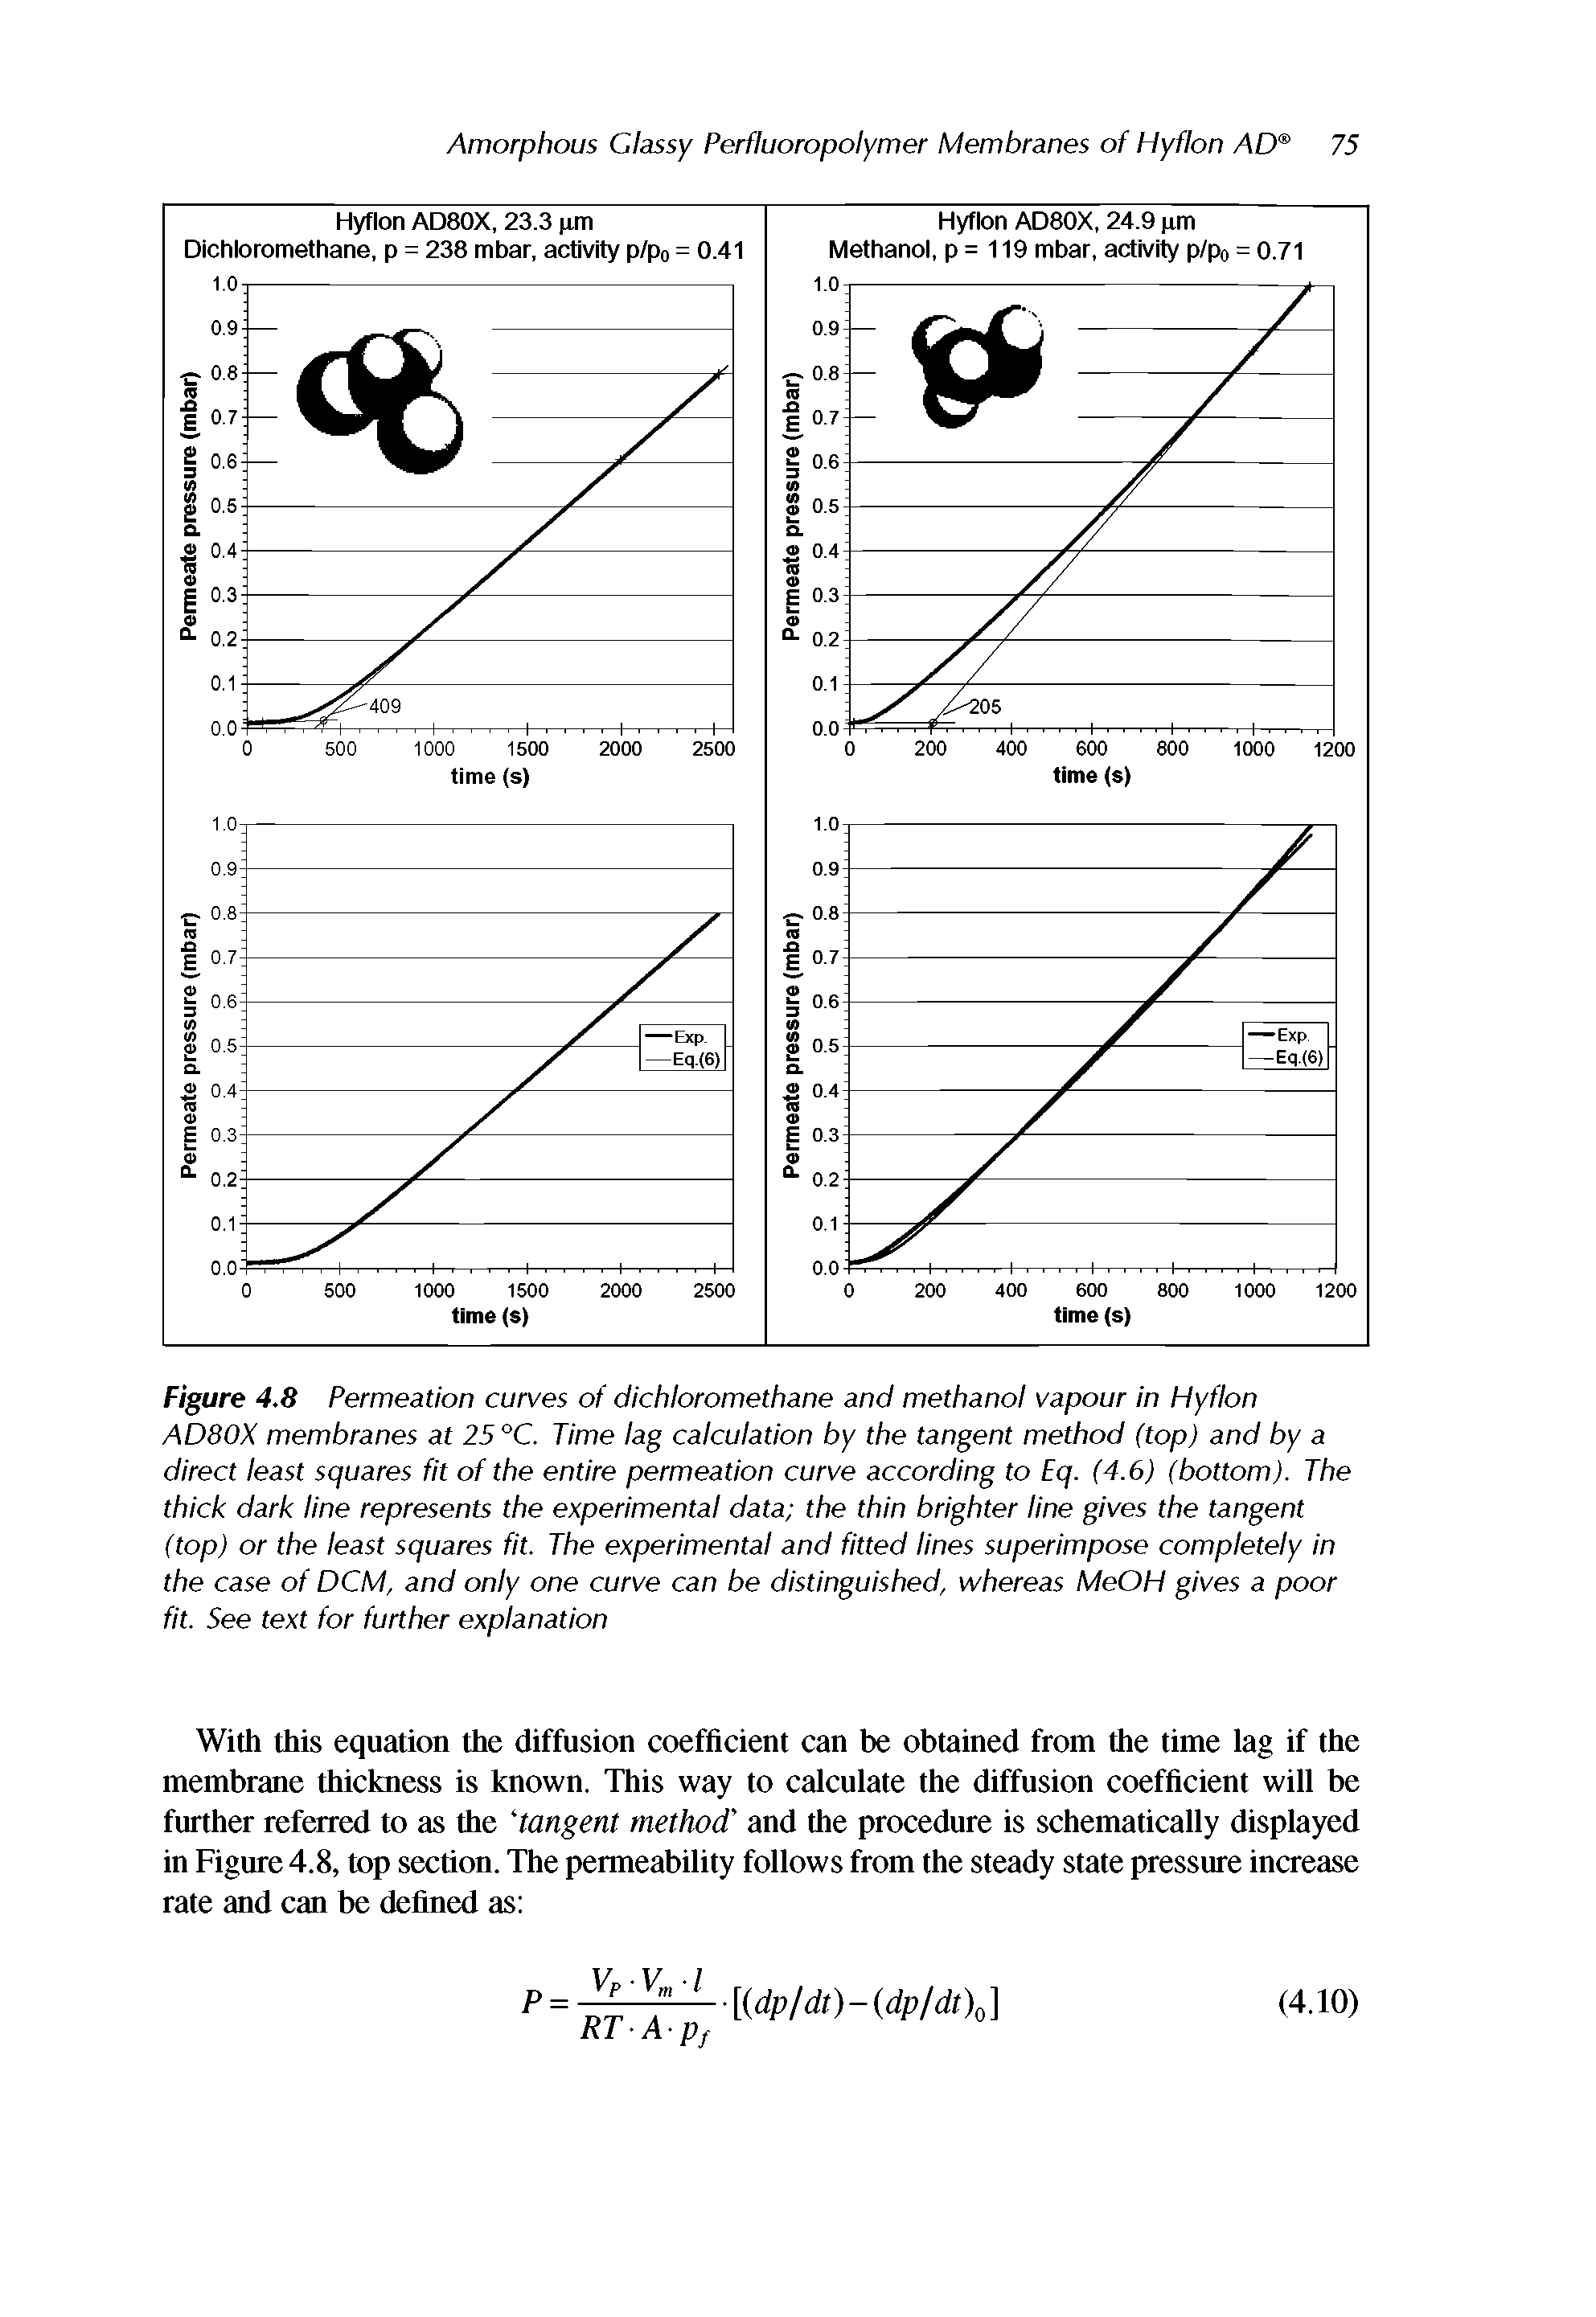 Figure 4.8 Permeation curves of dichloromethane and methanol vapour in Hyflon AD80X membranes at 25 °C. Time lag calculation by the tangent method (top) and by a direct least squares fit of the entire permeation curve according to Eq. (4.6) (bottom). The thick dark line represents the experimental data the thin brighter line gives the tangent (top) or the least squares fit. The experimental and fitted lines superimpose completely in the case of DCM, and only one curve can be distinguished, whereas MeOH gives a poor fit. See text for further explanation...